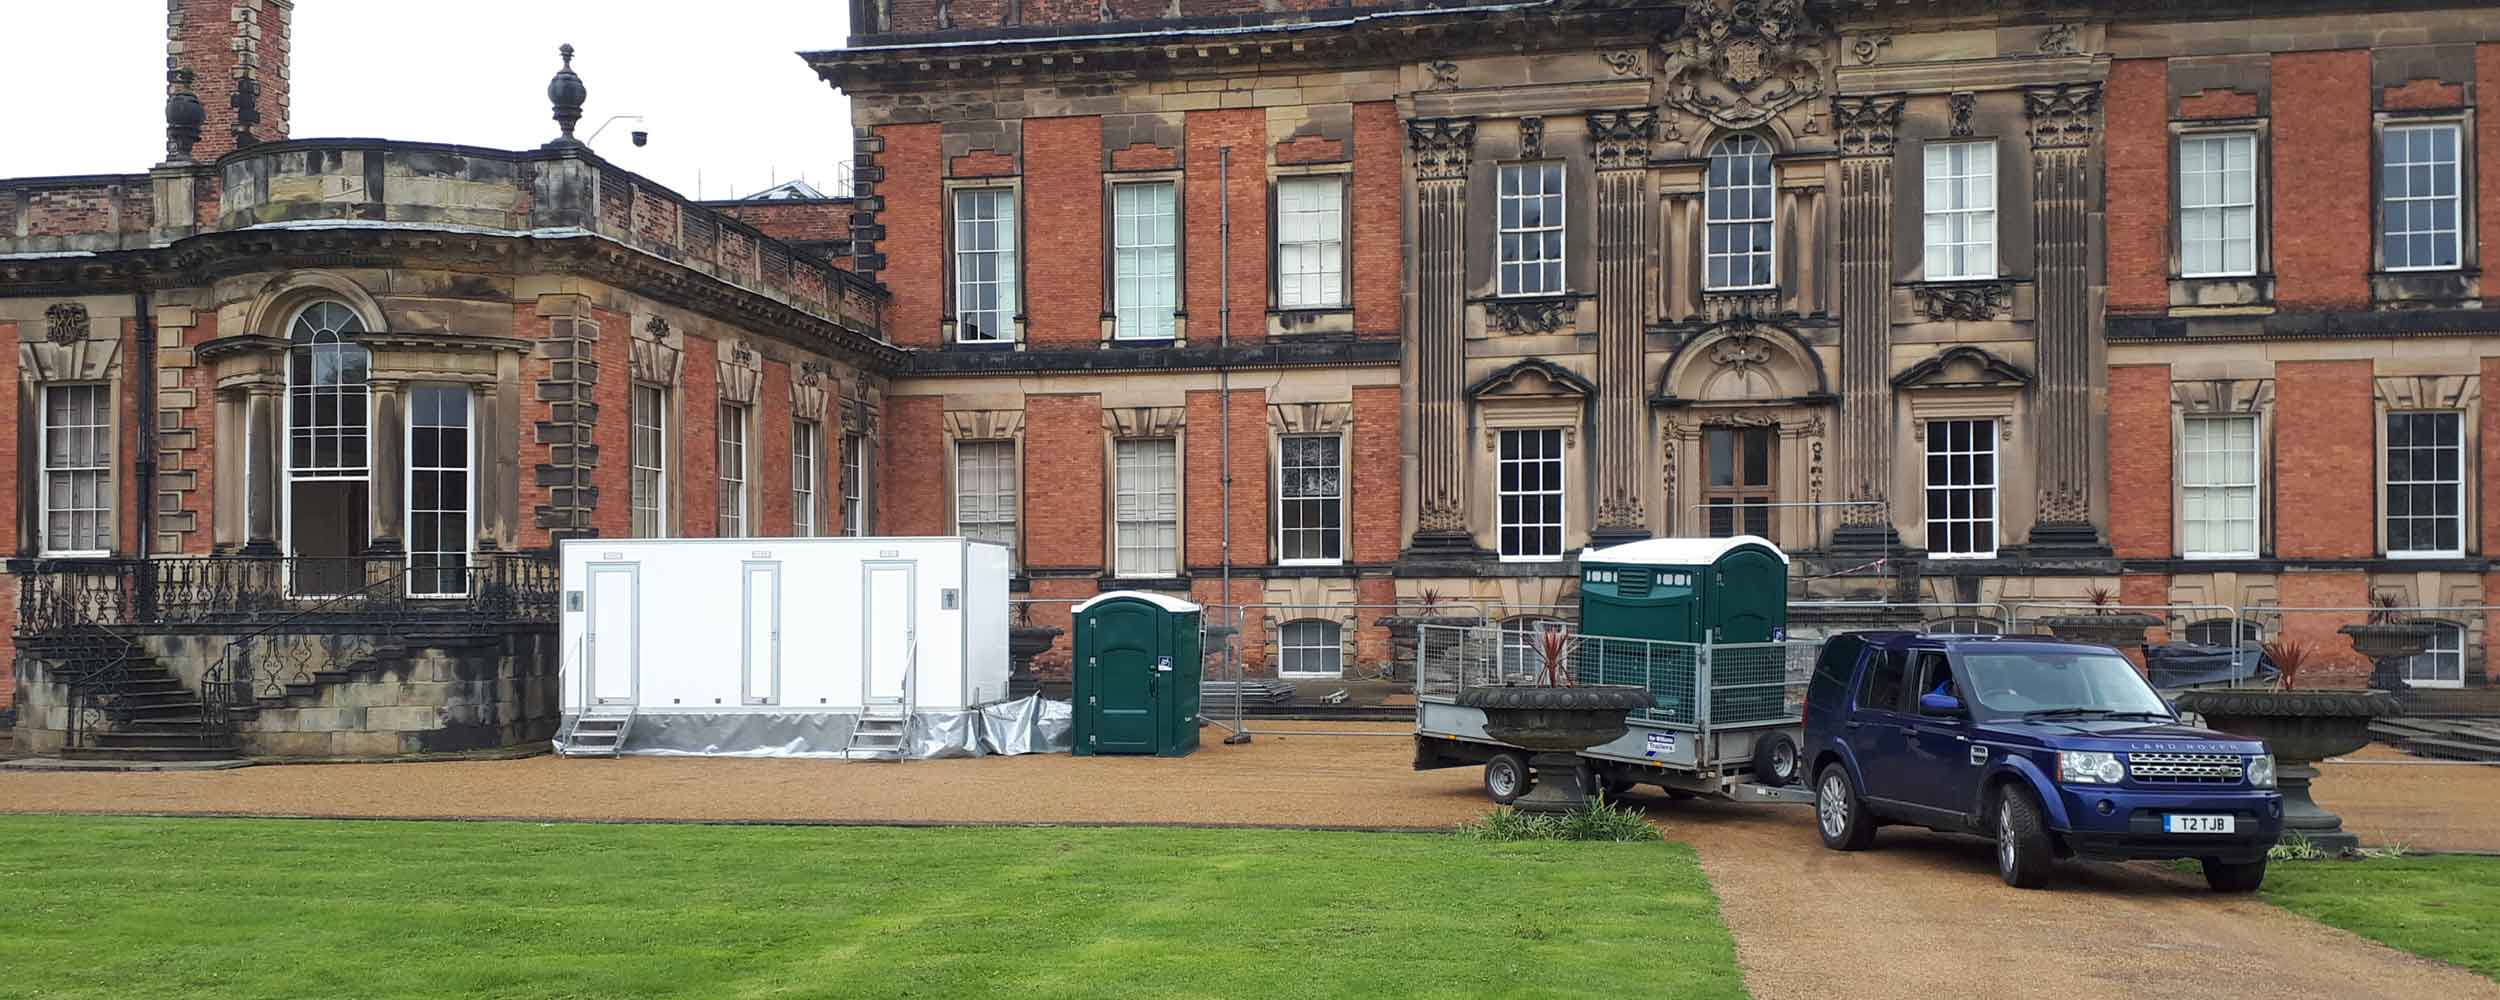 Luxury toilet hire for outdoor events, east midlands